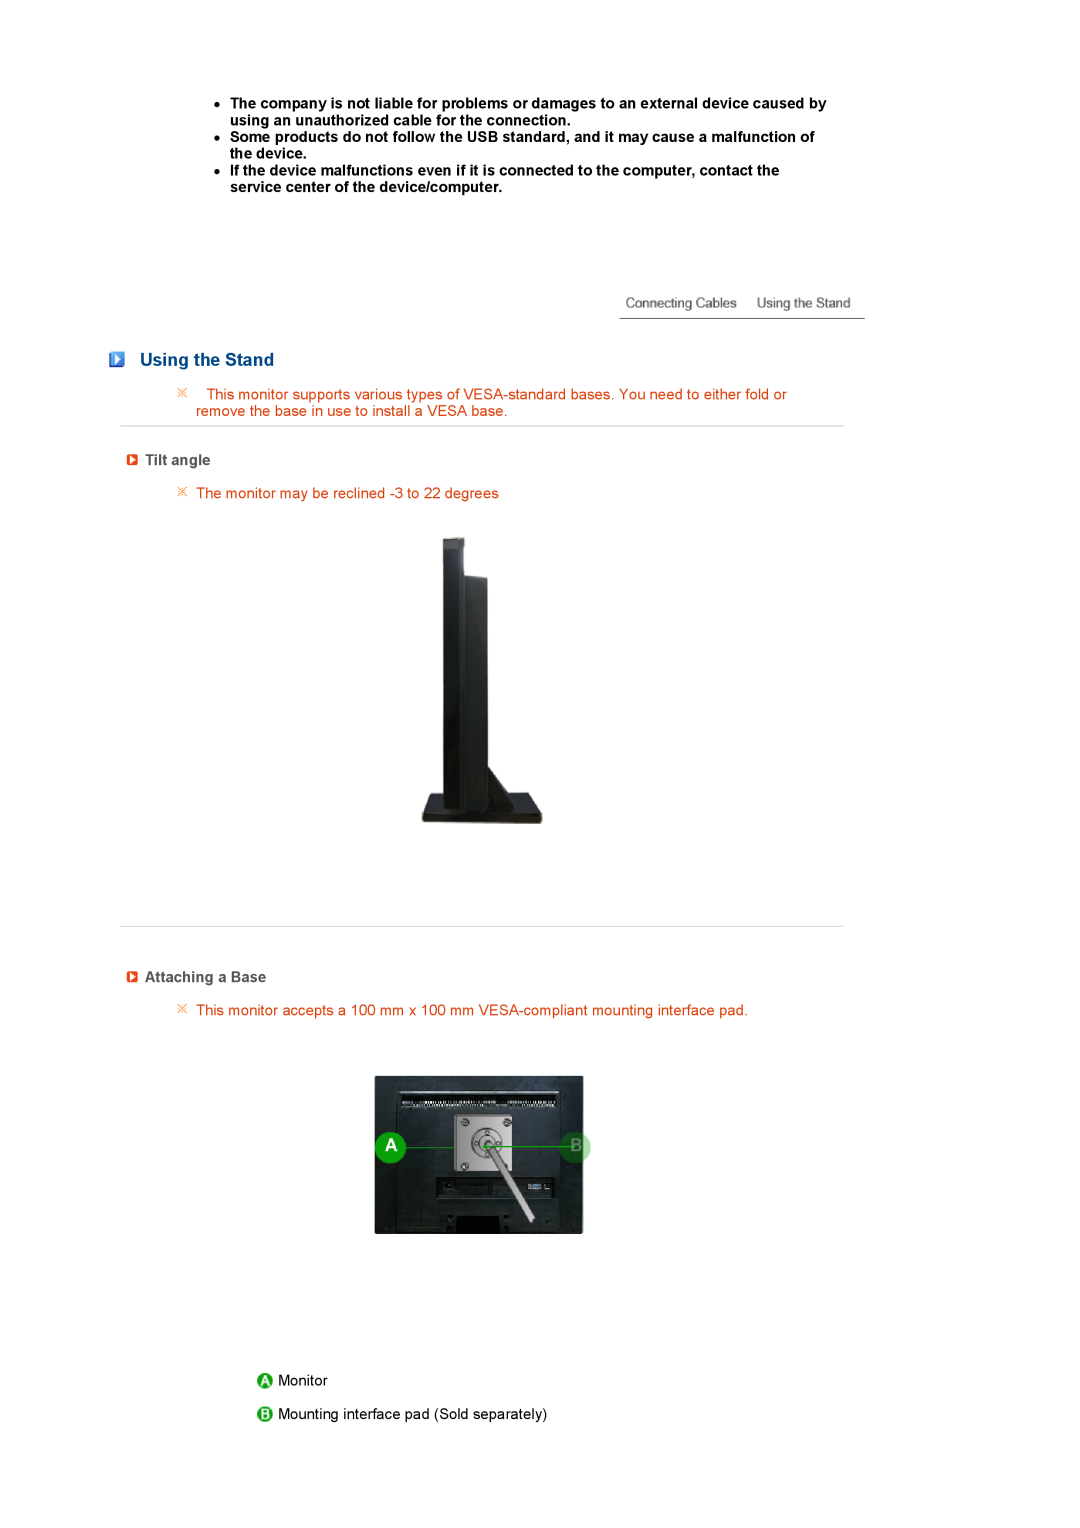 Samsung 225UN quick start Using the Stand, Tilt angle, The monitor may be reclined -3 to 22 degrees, Attaching a Base 